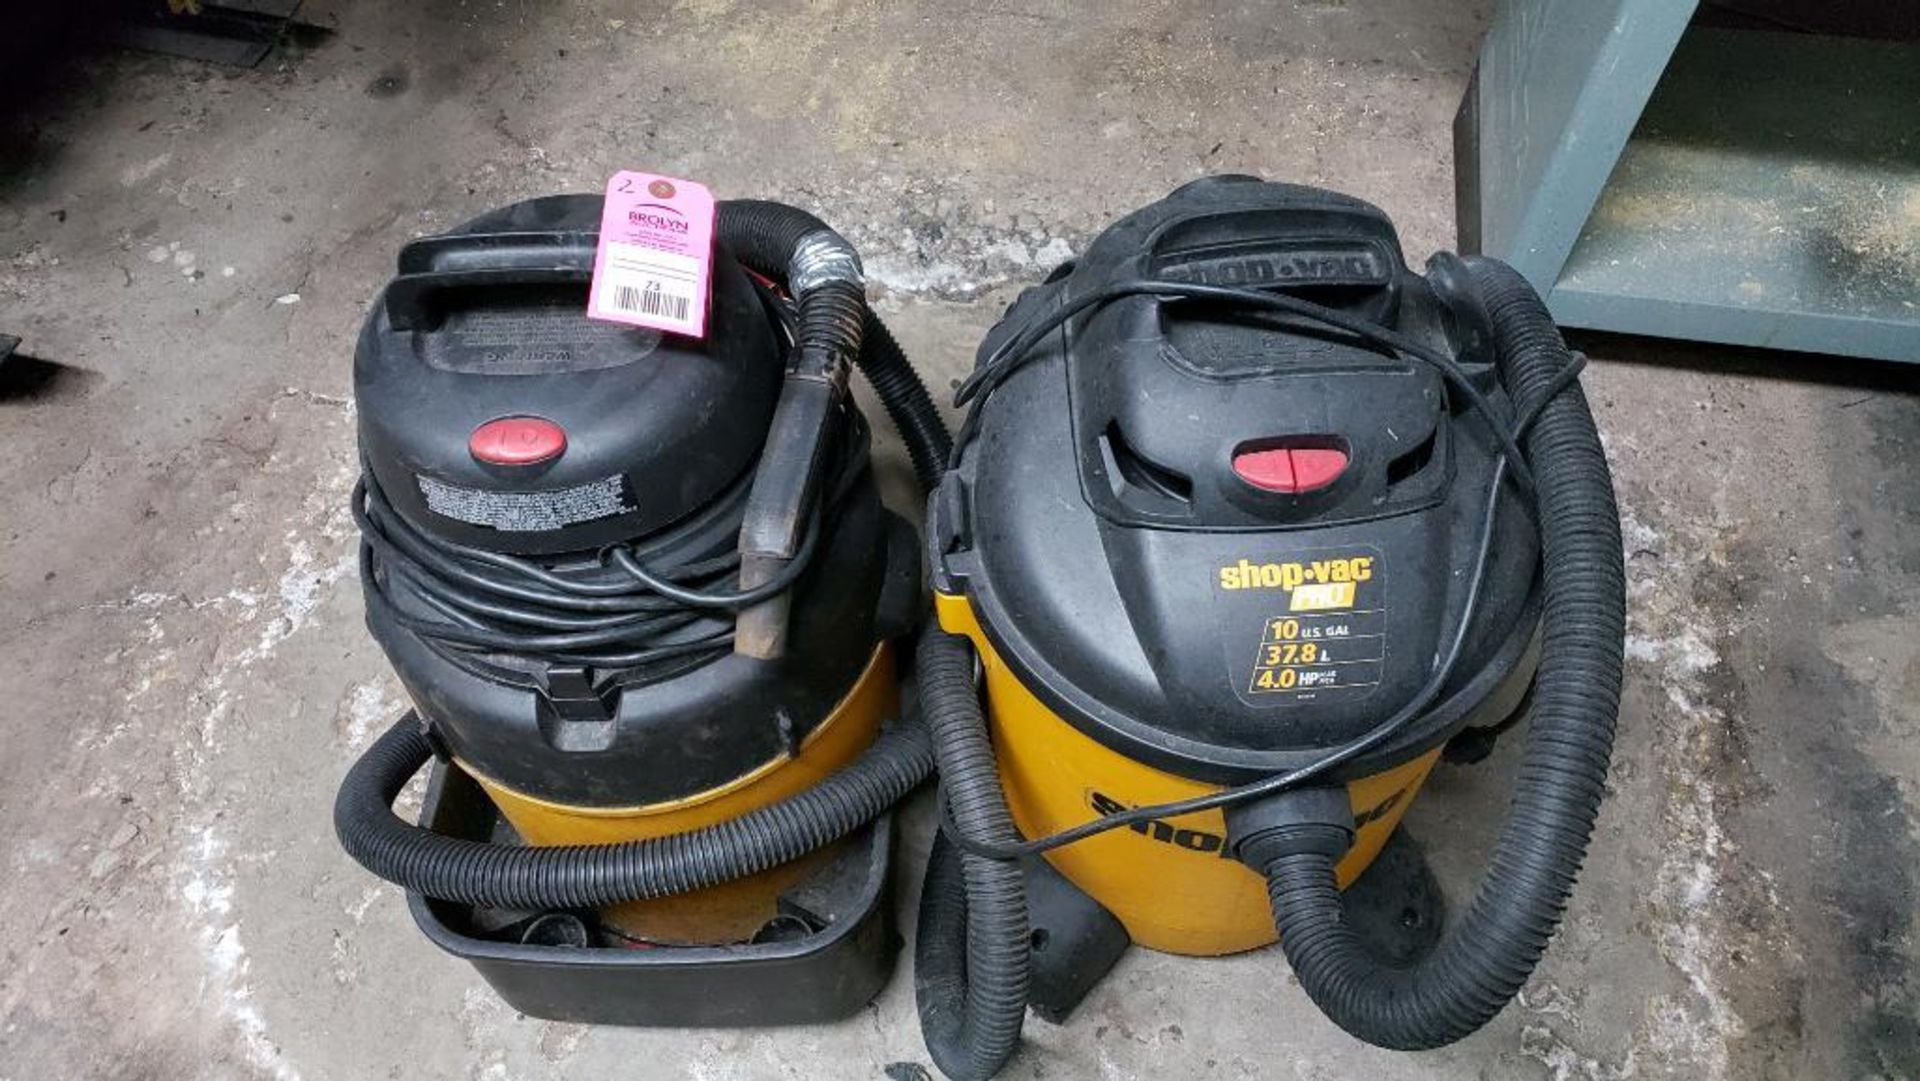 Qty 2 - Shop Vac. One 4.0hp, 10 gallon, one unmarked.